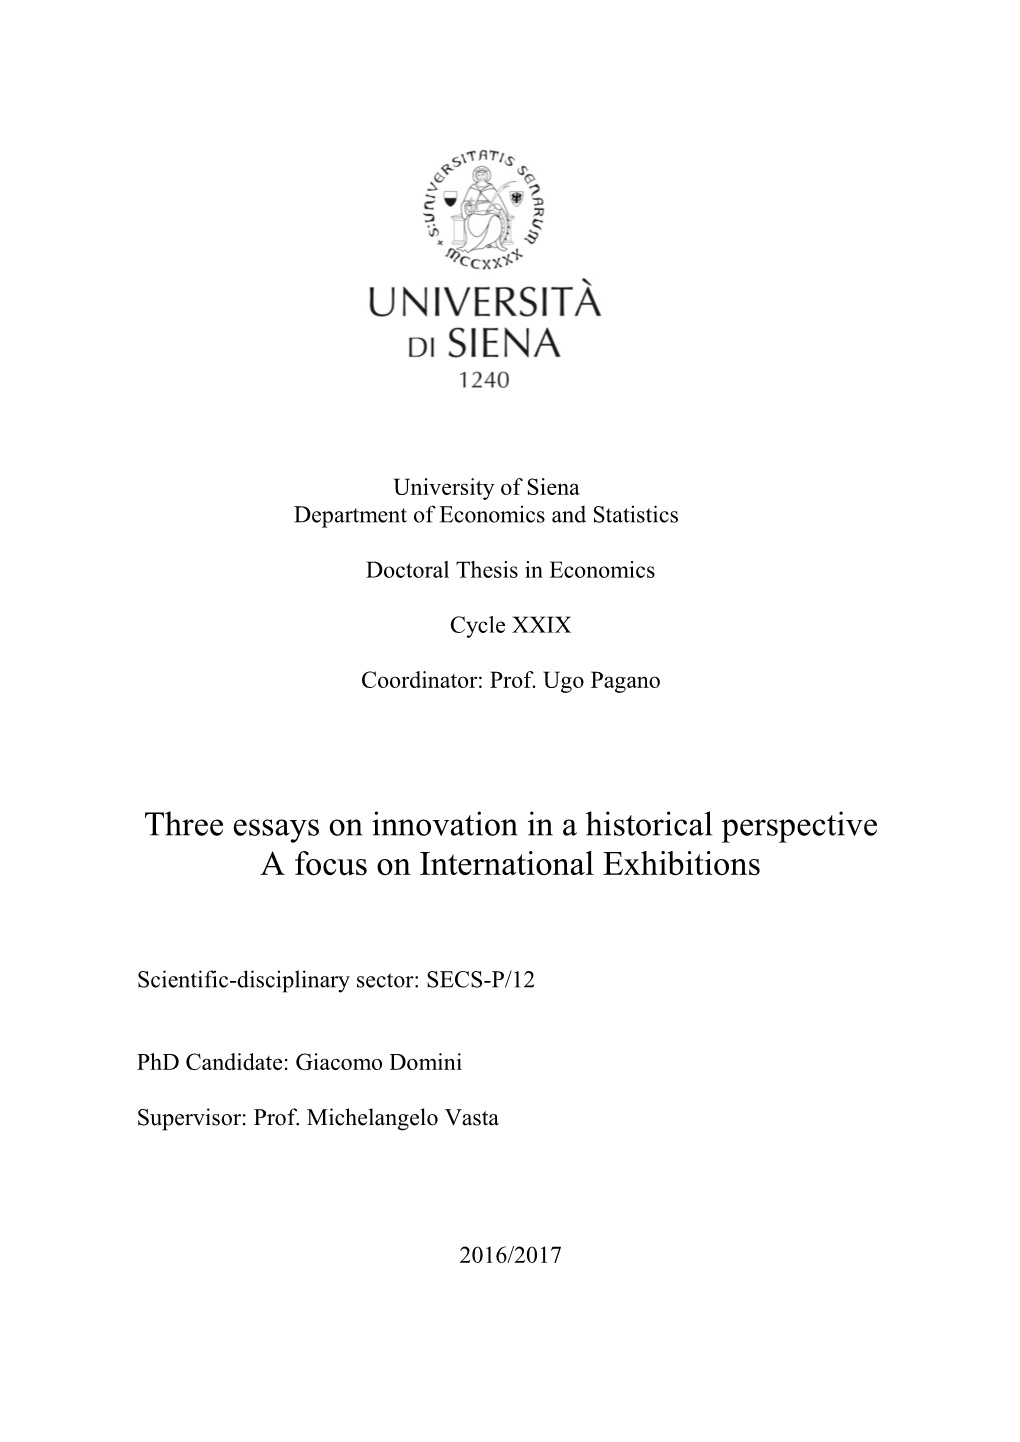 Three Essays on Innovation in a Historical Perspective a Focus on International Exhibitions